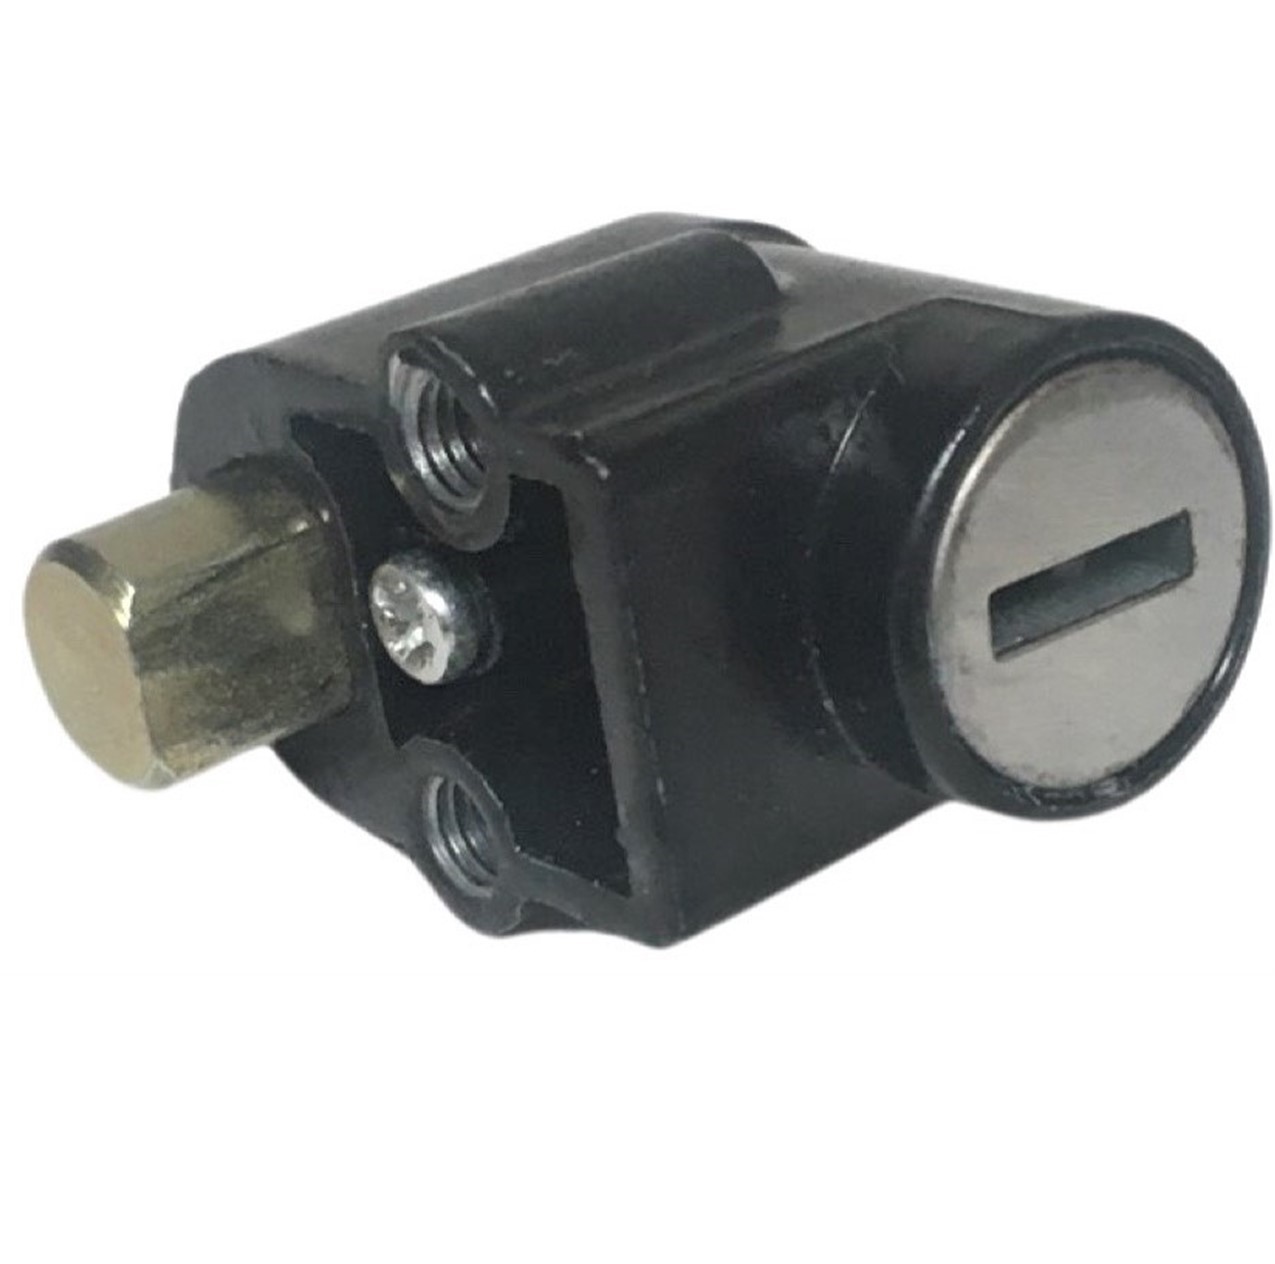 Ignition Switch Fits Many ATVs With Helmet Lock 4 Pin in 4 Pin Round Jack